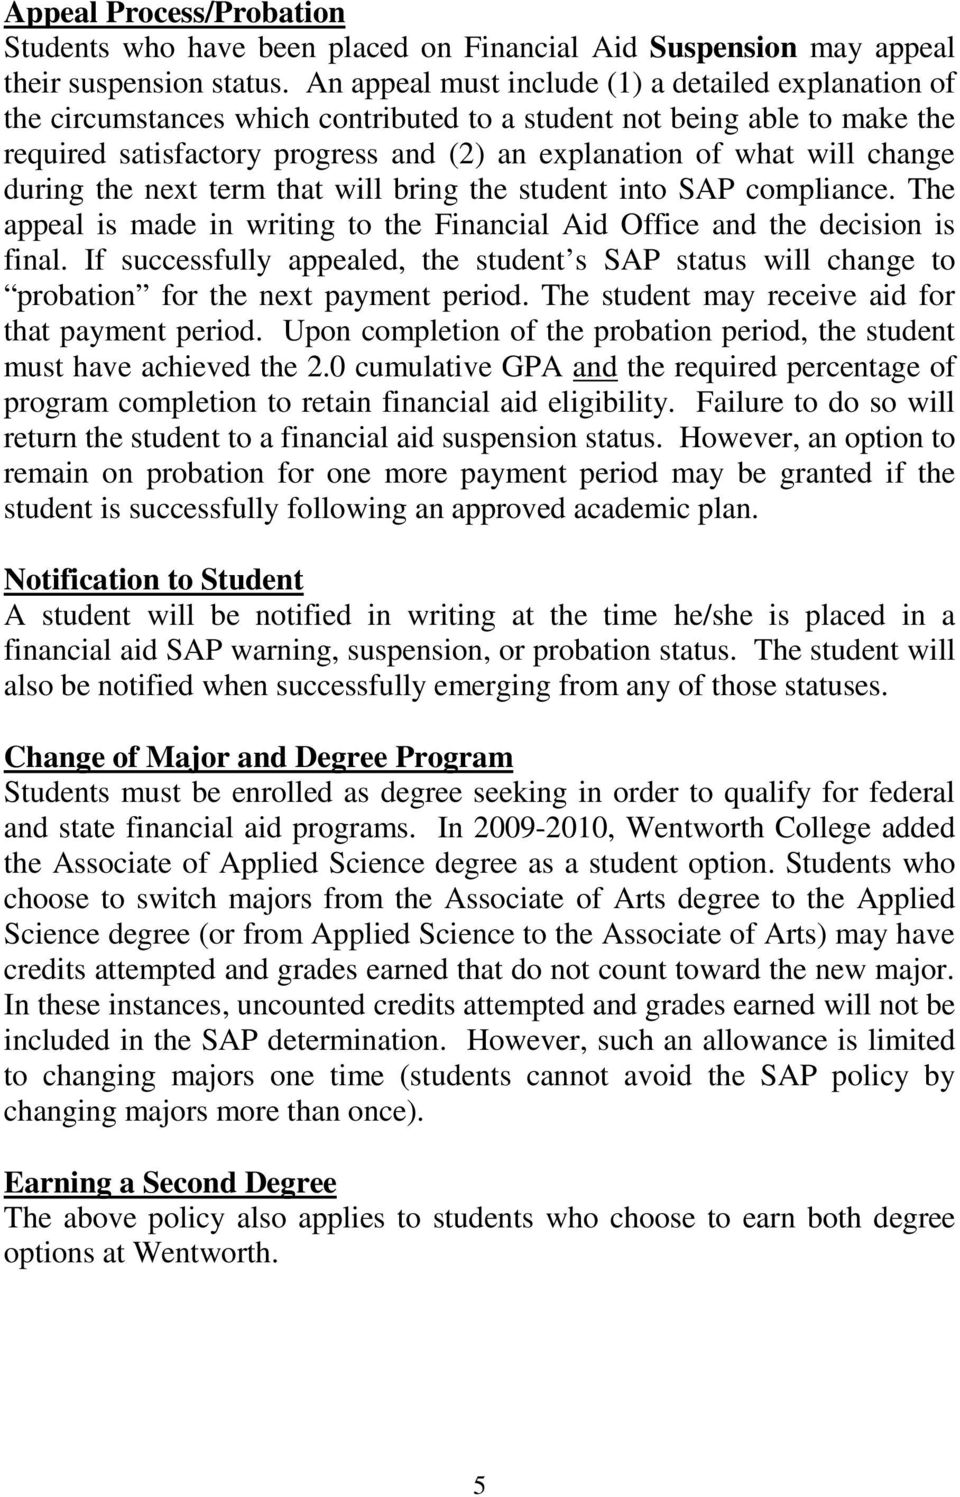 change during the next term that will bring the student into SAP compliance. The appeal is made in writing to the Financial Aid Office and the decision is final.